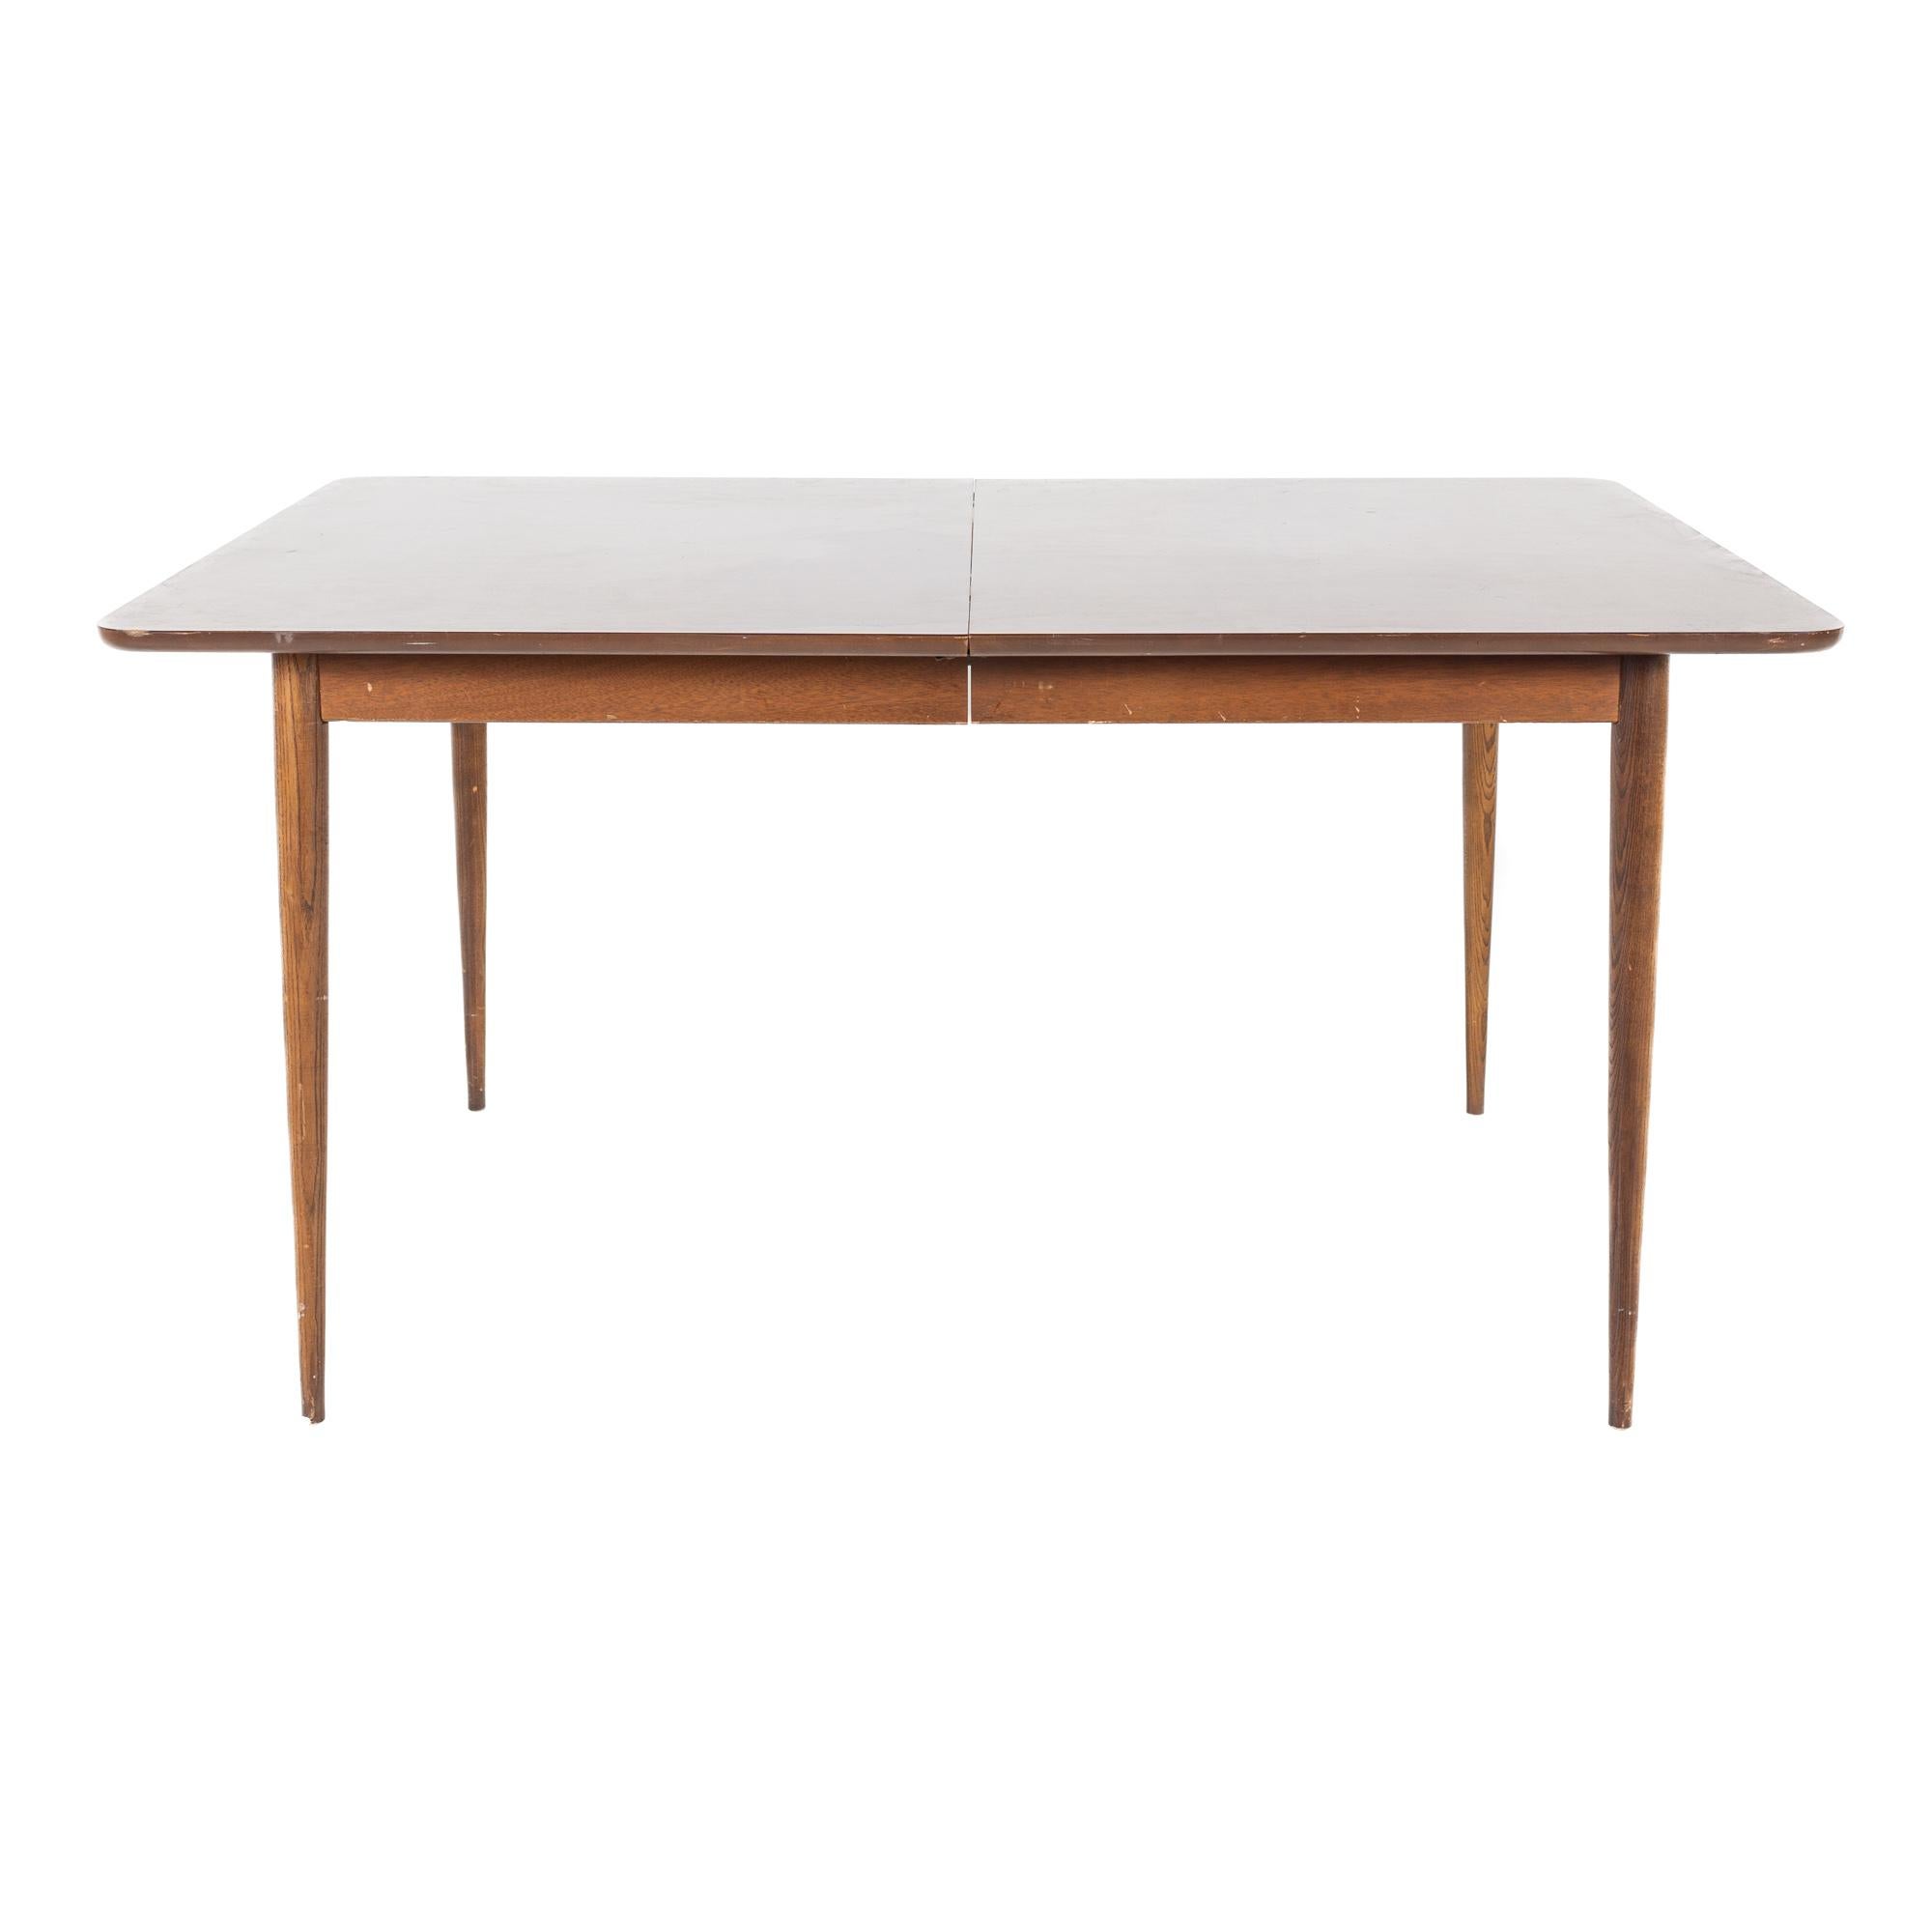 Broyhill style mid-century laminate top dining table

This table measures: 60 wide x 40 deep x 30 inches high, with a chair clearance of 25 inches

All pieces of furniture can be had in what we call restored vintage condition. That means the